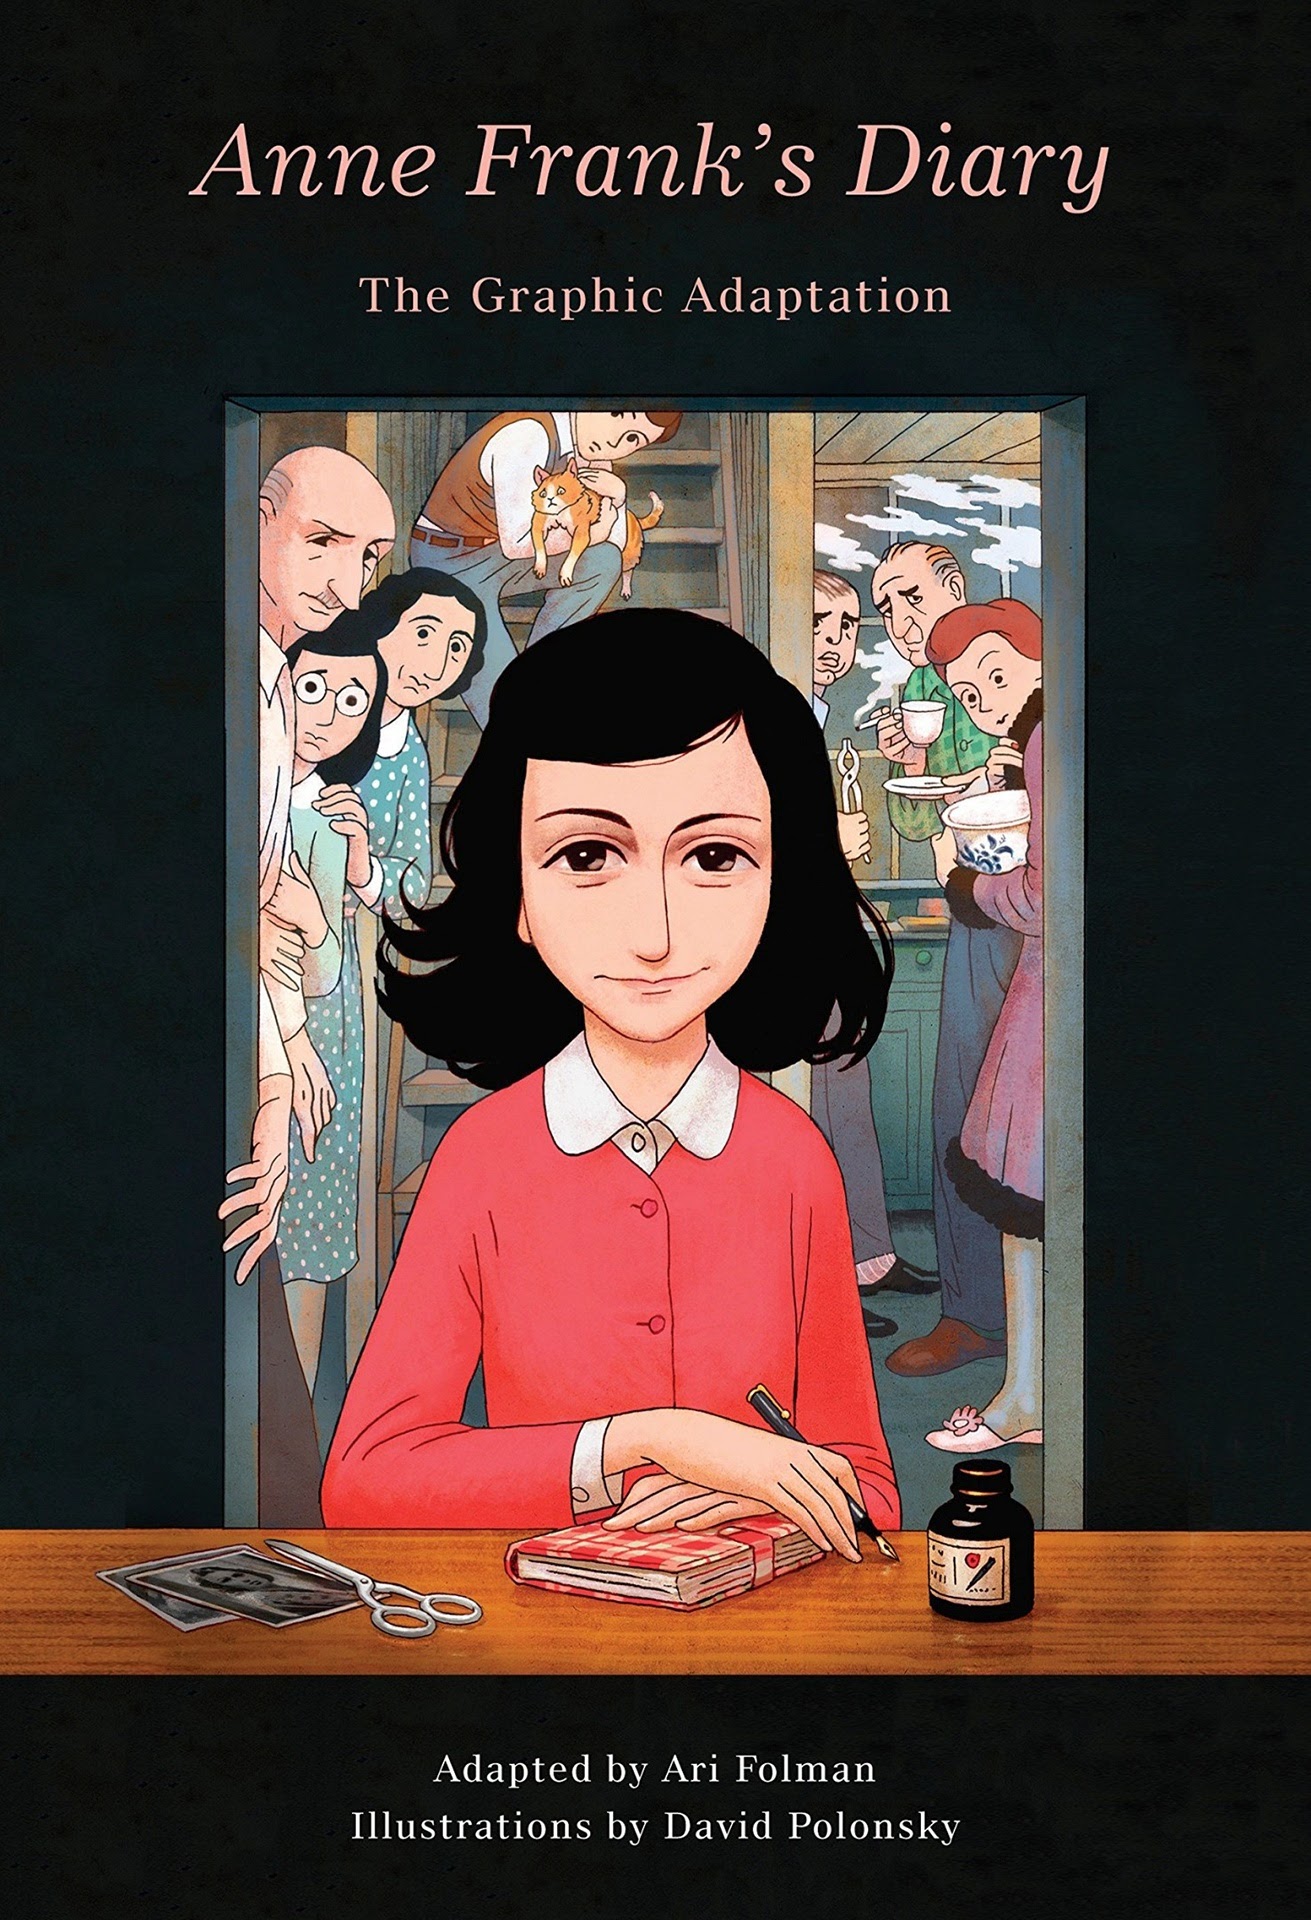 Read online Anne Frank’s Diary: The Graphic Adaptation comic -  Issue # TPB - 1